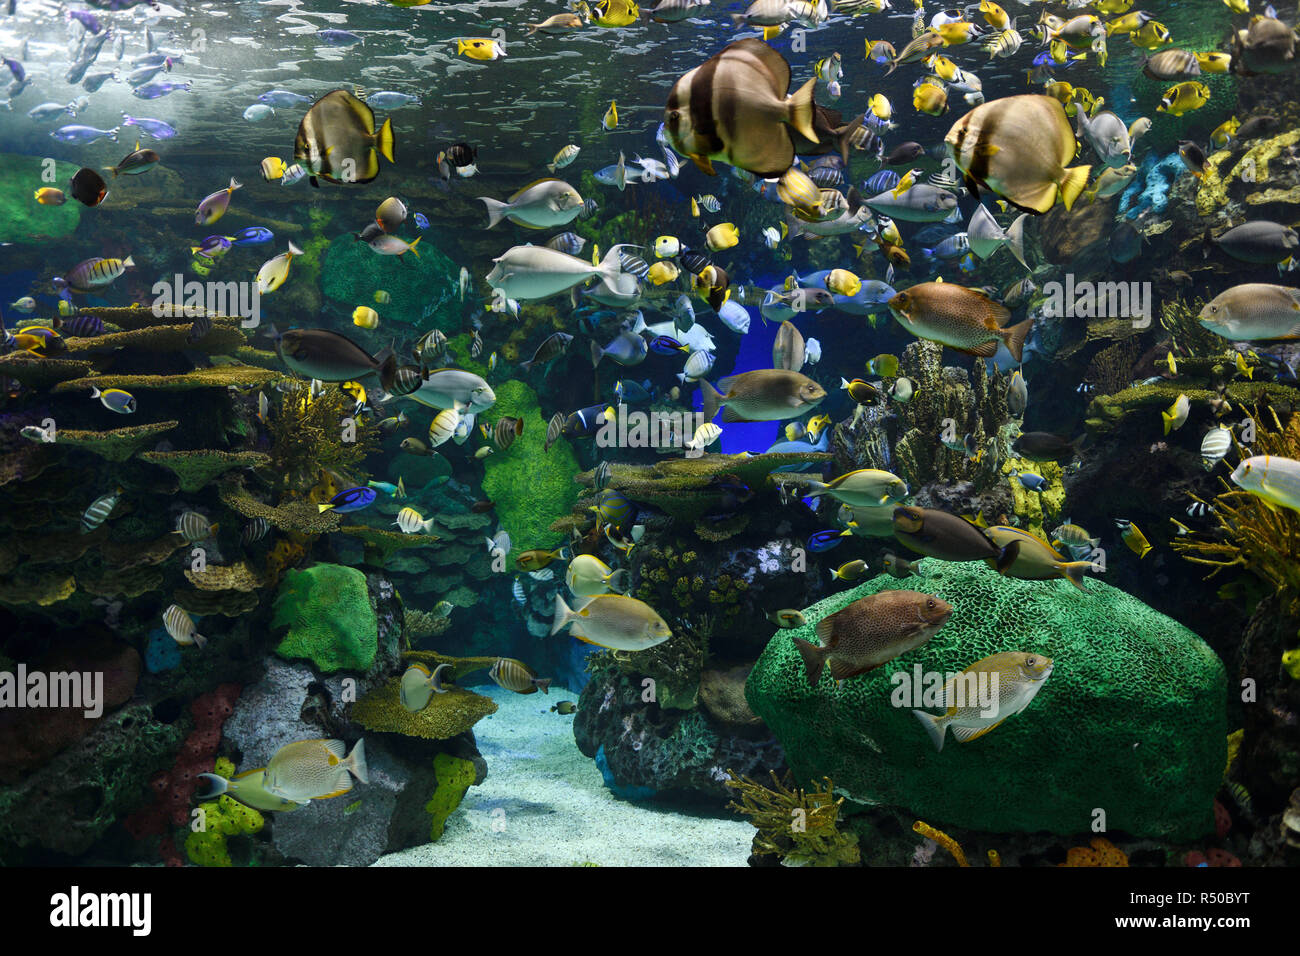 Indo-Pacific Coral Reef and tropical fish of Rainbow Reef at Ripley's Aquarium Toronto Stock Photo